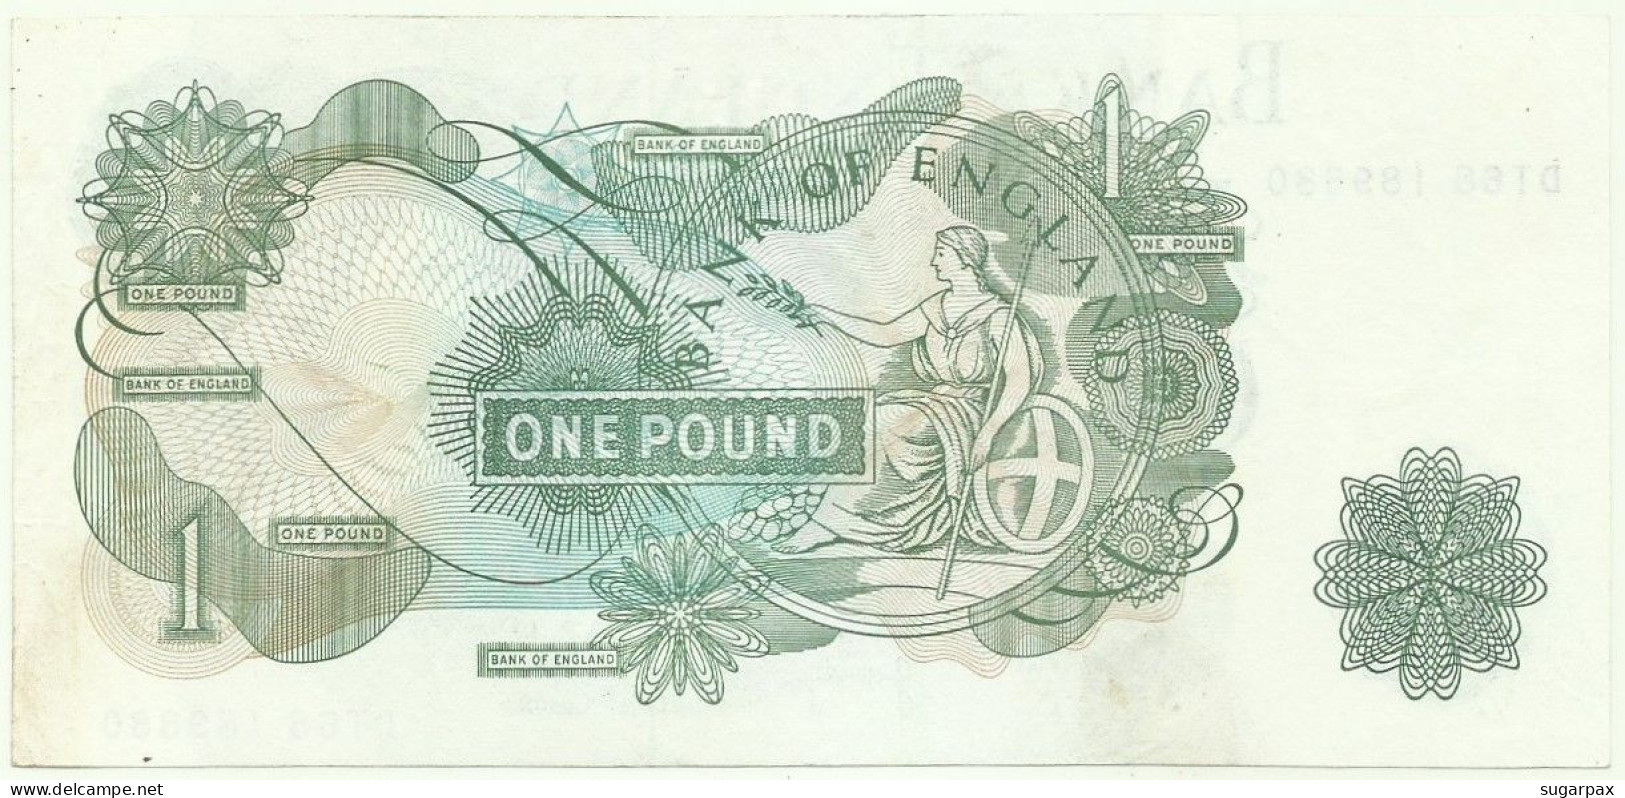 GREAT BRITAIN - 1 POUND - ND ( 1970-77 ) - P 374 G - Serie DT68 - BANK OF ENGLAND - United Kingdom - 1 Pound